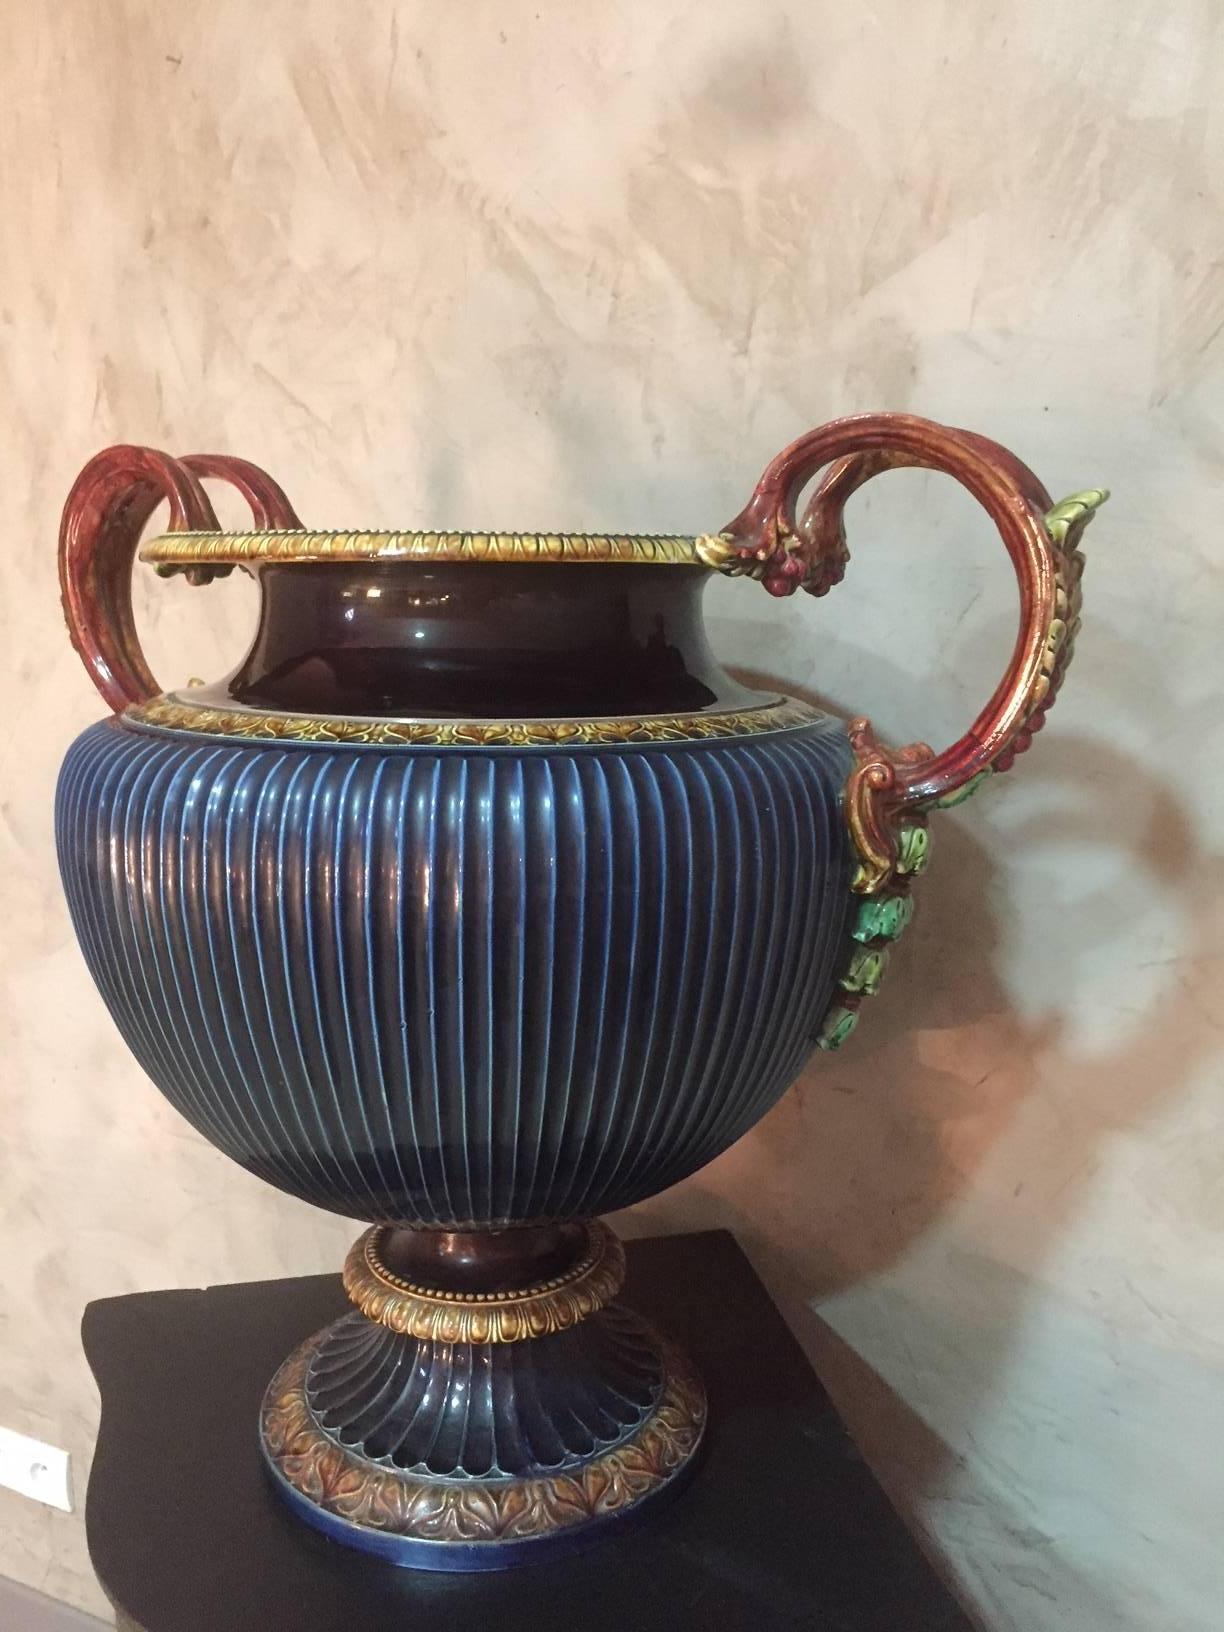 Very nice and rare French Napoleon III Sarreguemines cachepots with two handles.
Nice blue, red and green colors.
One handle and the base has been restored in an ancient way.